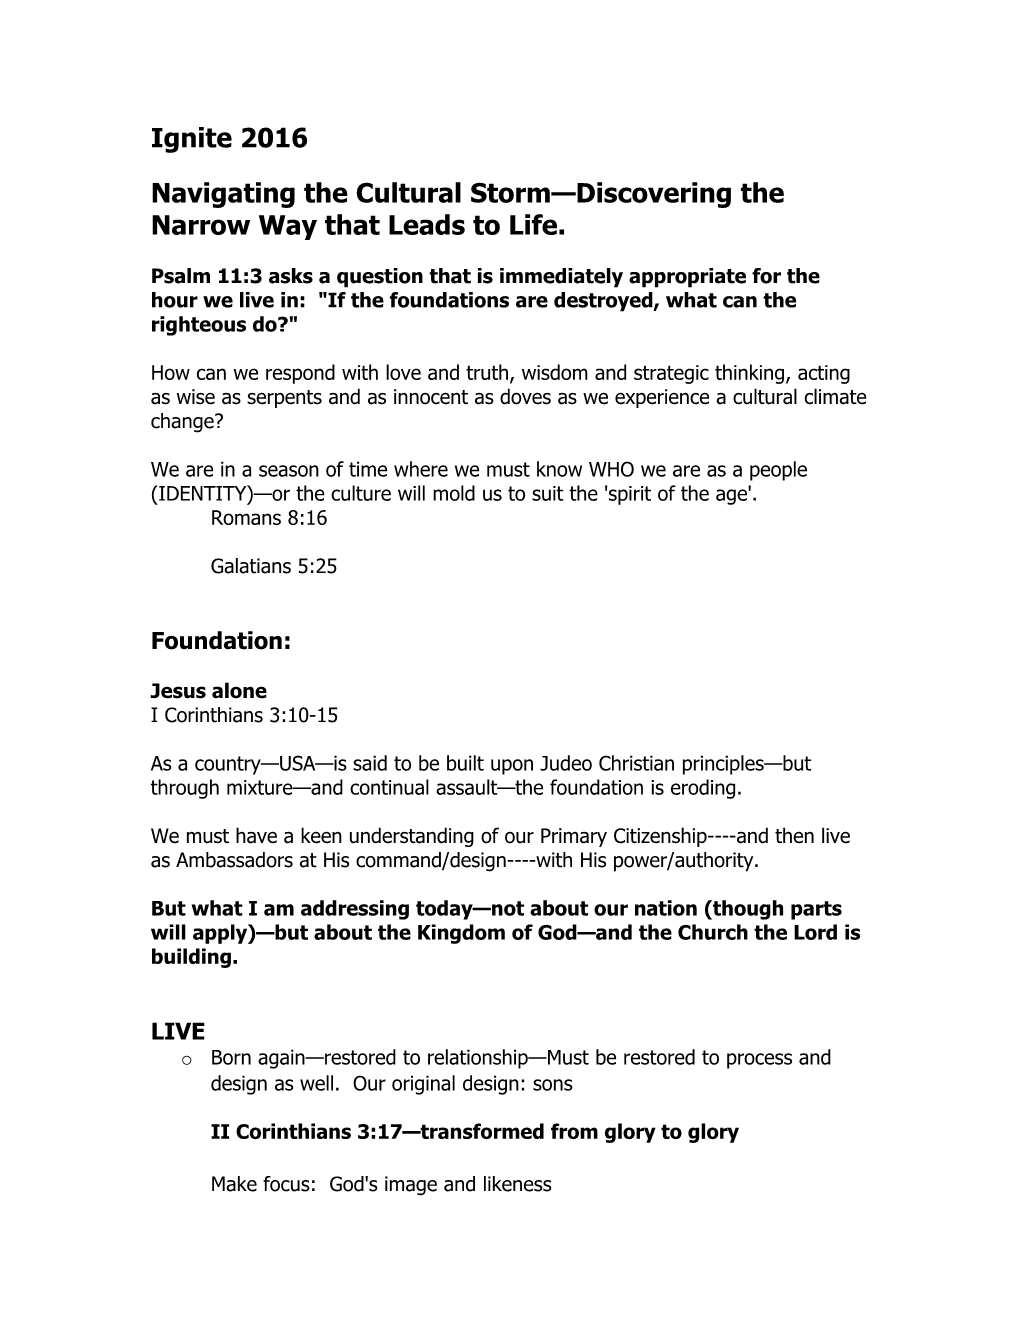 Navigating the Cultural Storm Discovering the Narrow Way That Leads to Life